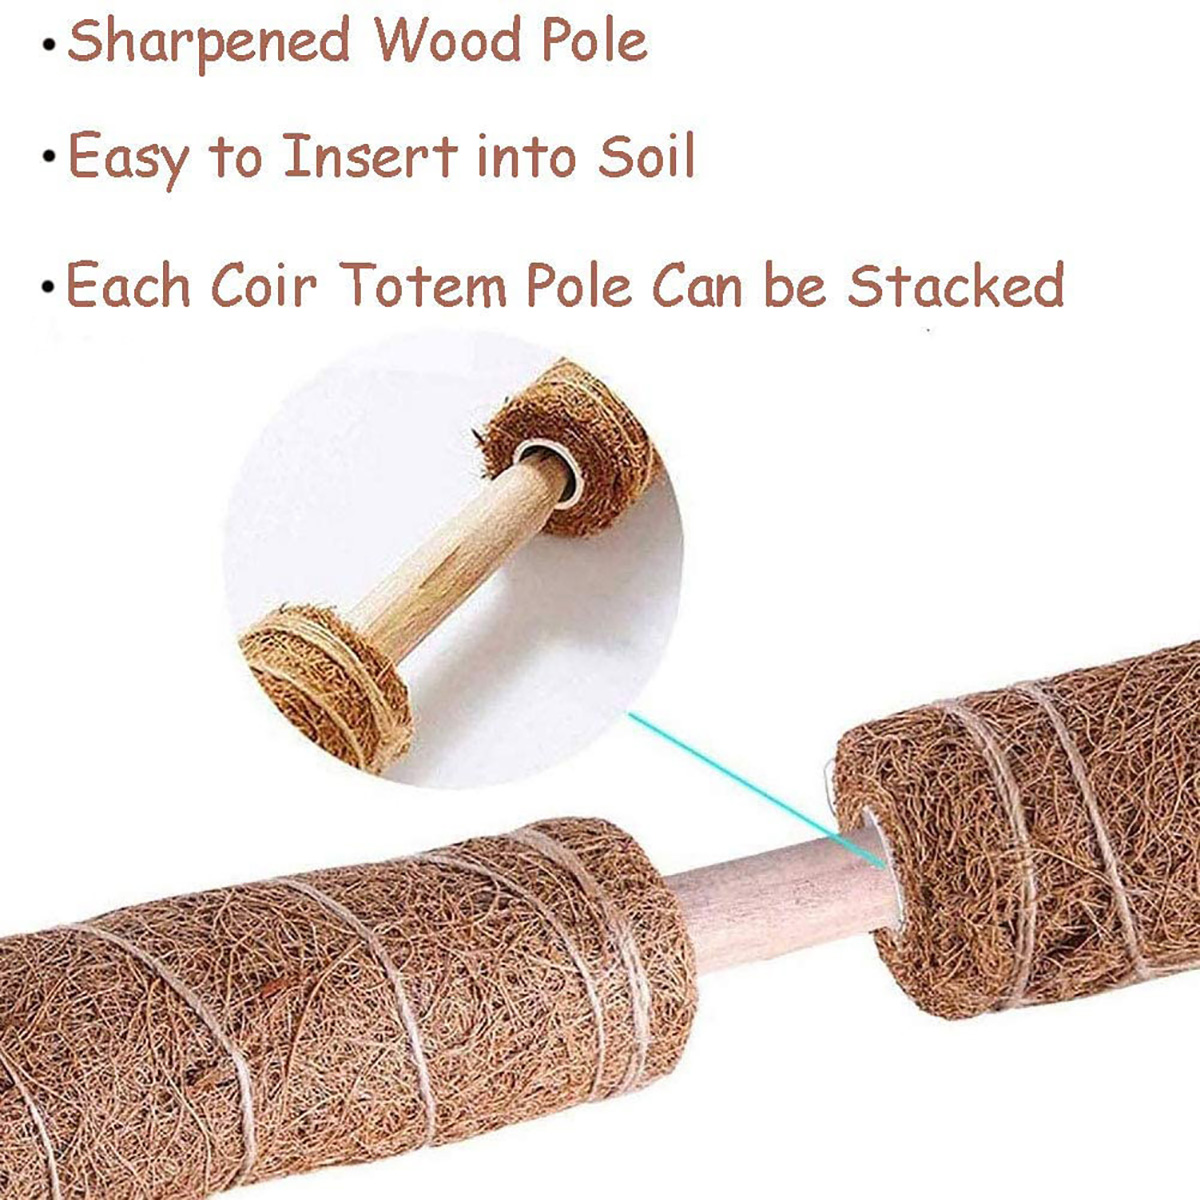 4-Pack-Coir-Totem-Pole-Plant-Coir-Moss-Stick-Totem-Pole-for-Climmbing-Plant-Support-Extension-Climbi-1824346-3